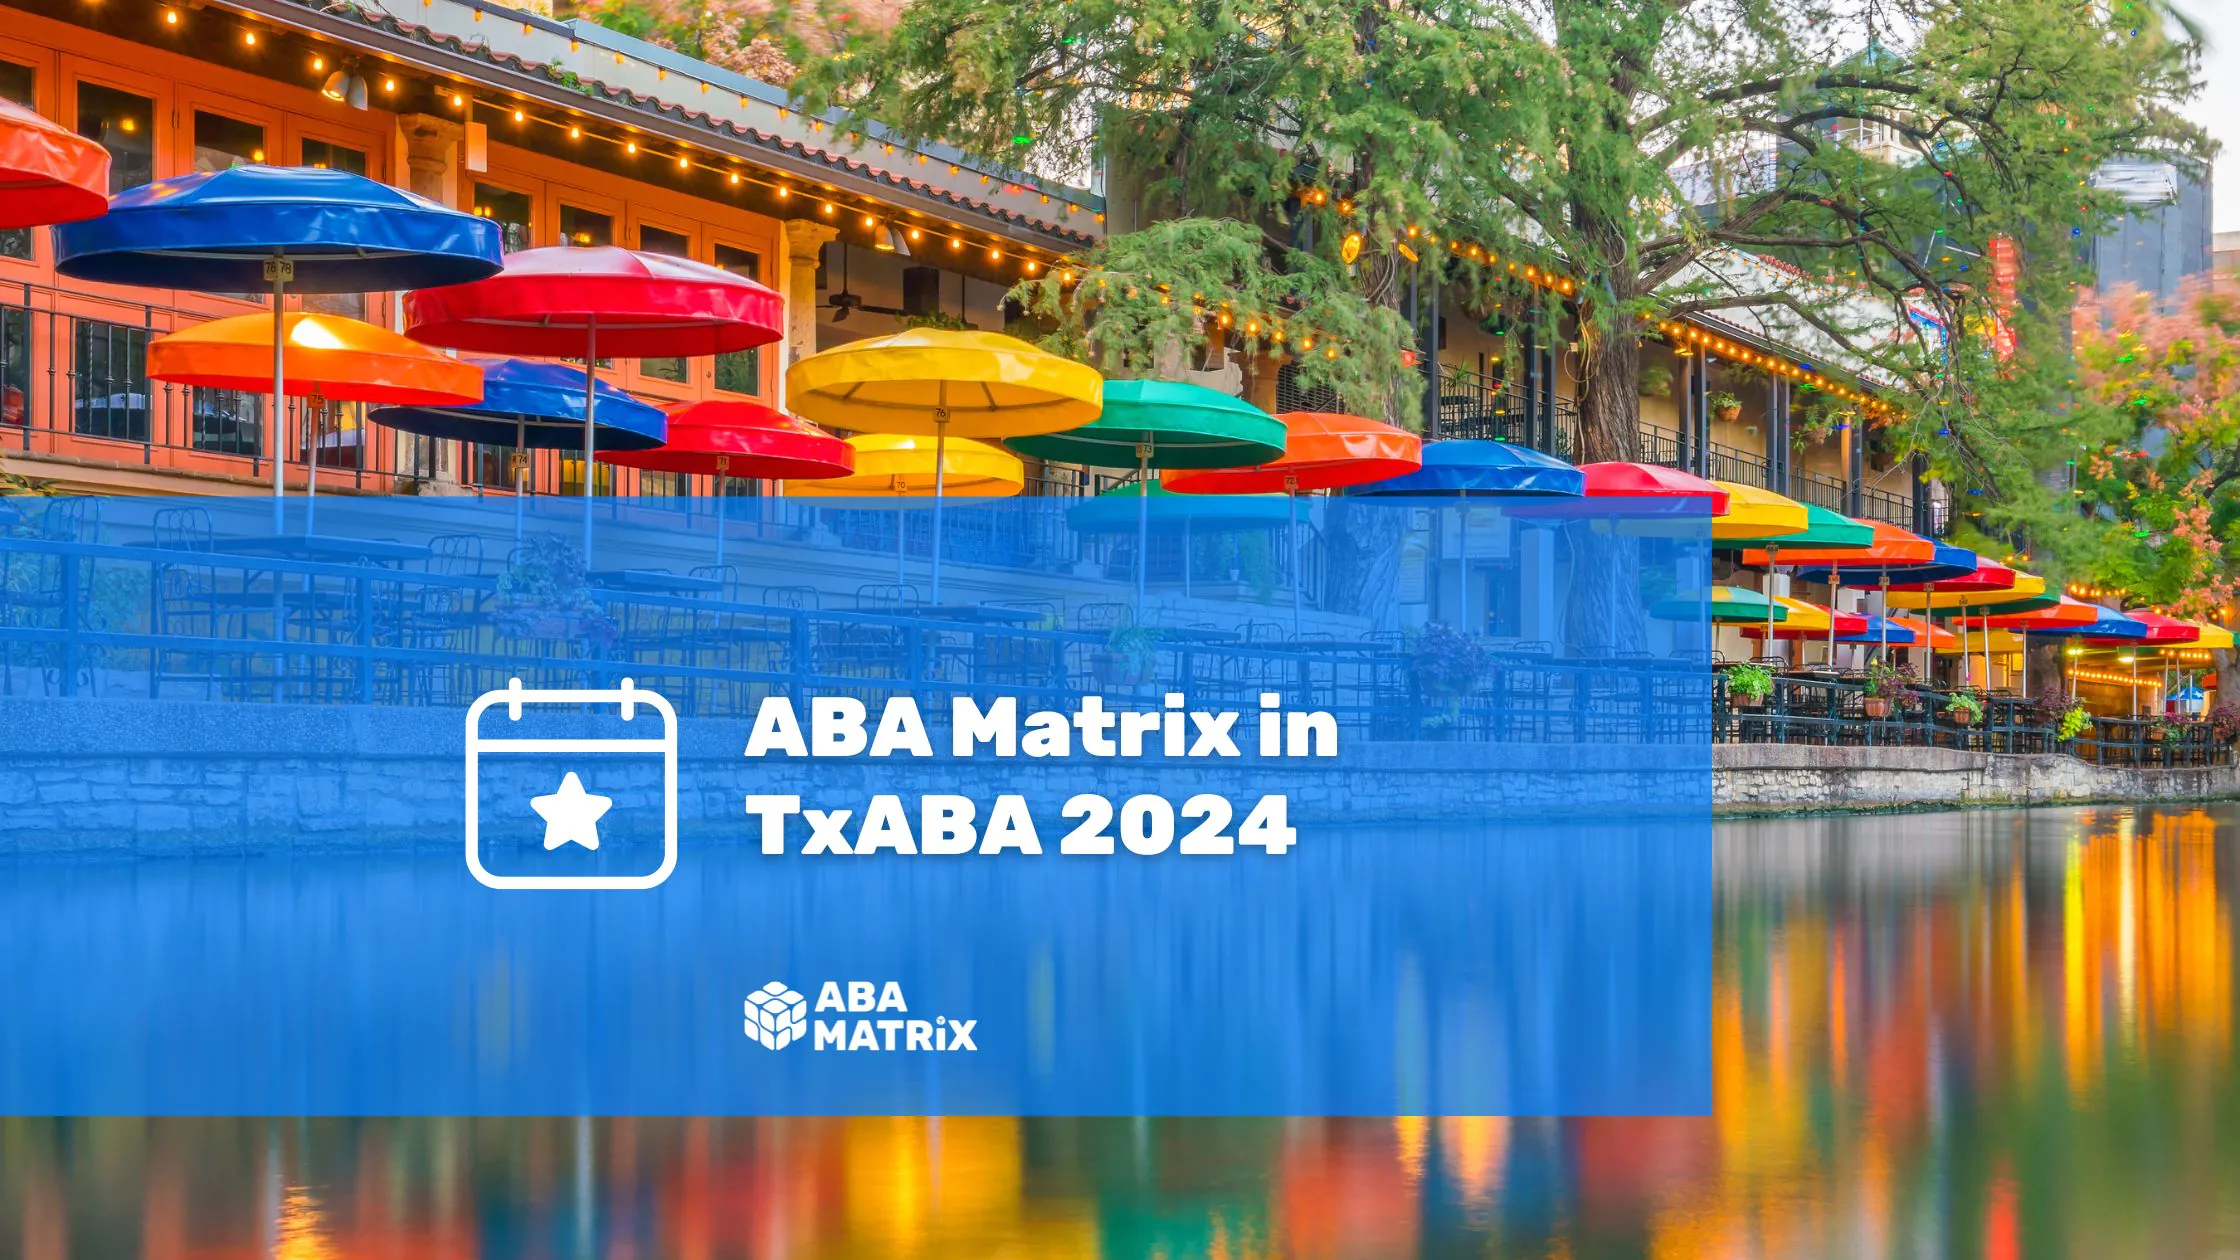 ABA Matrix is attending the TxABA Conference 2024